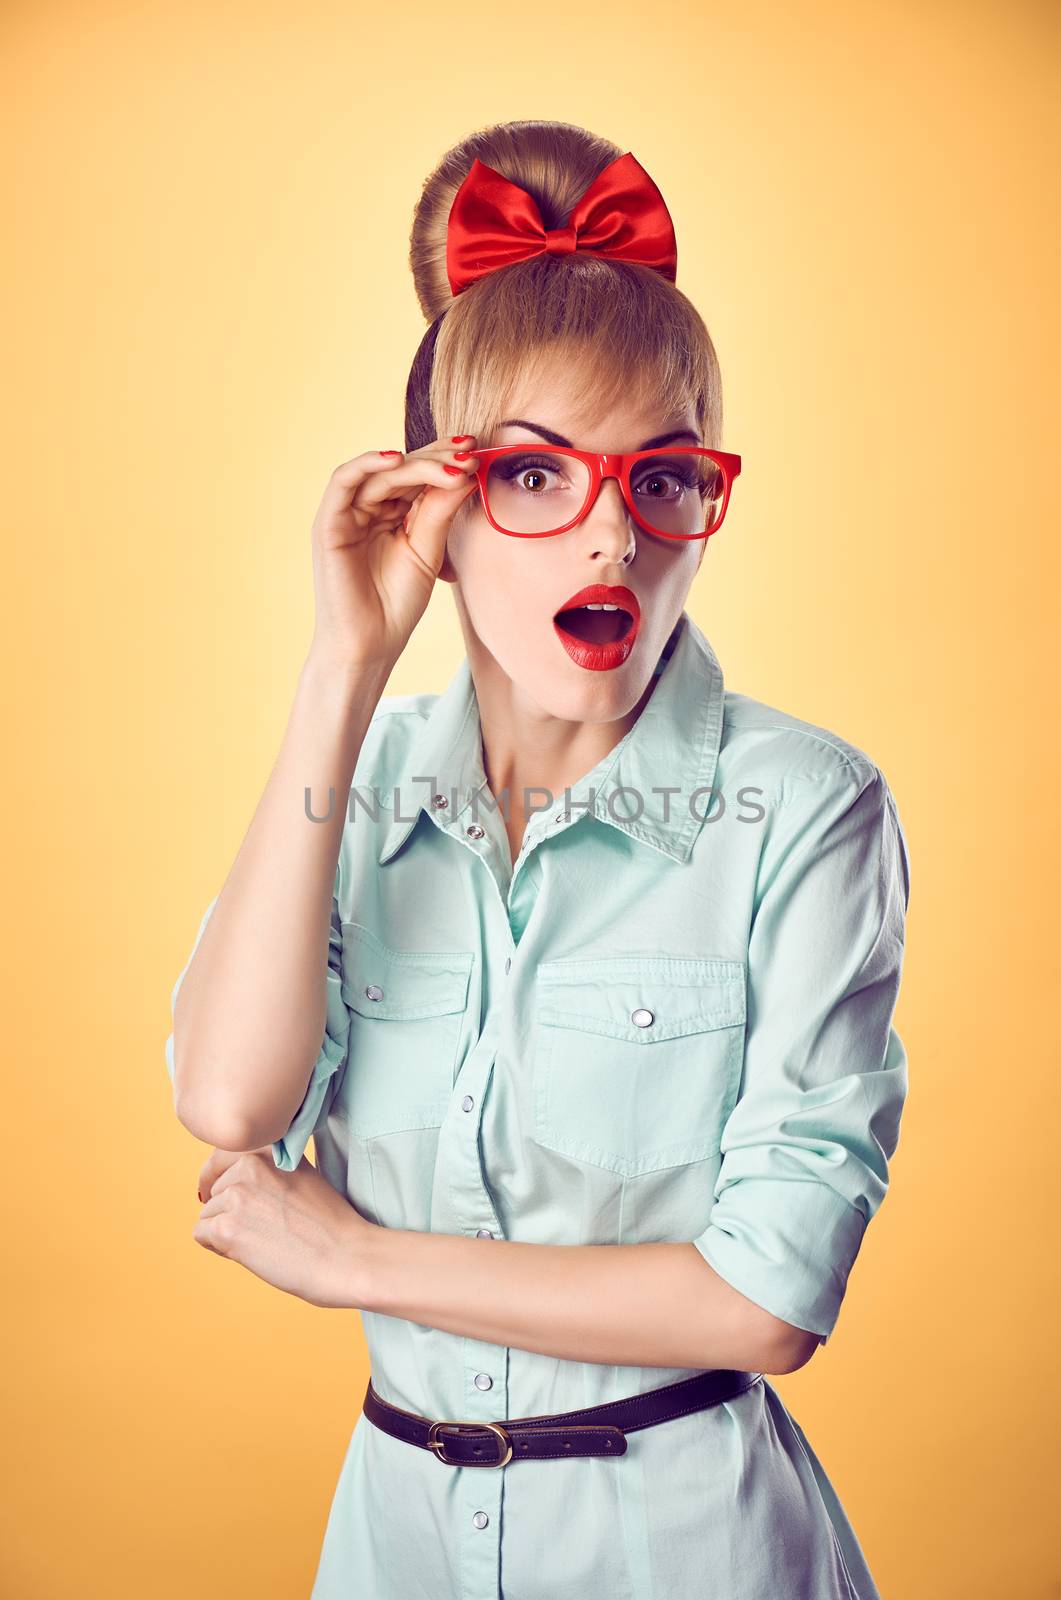 Beauty fashion portrait business woman, stylish red glasses surprised, open mouth, shocked. Attractive blonde girl,  confidence, Pinup hairstyle bow makeup.Unusual playful, emotions.Vintage, on yellow